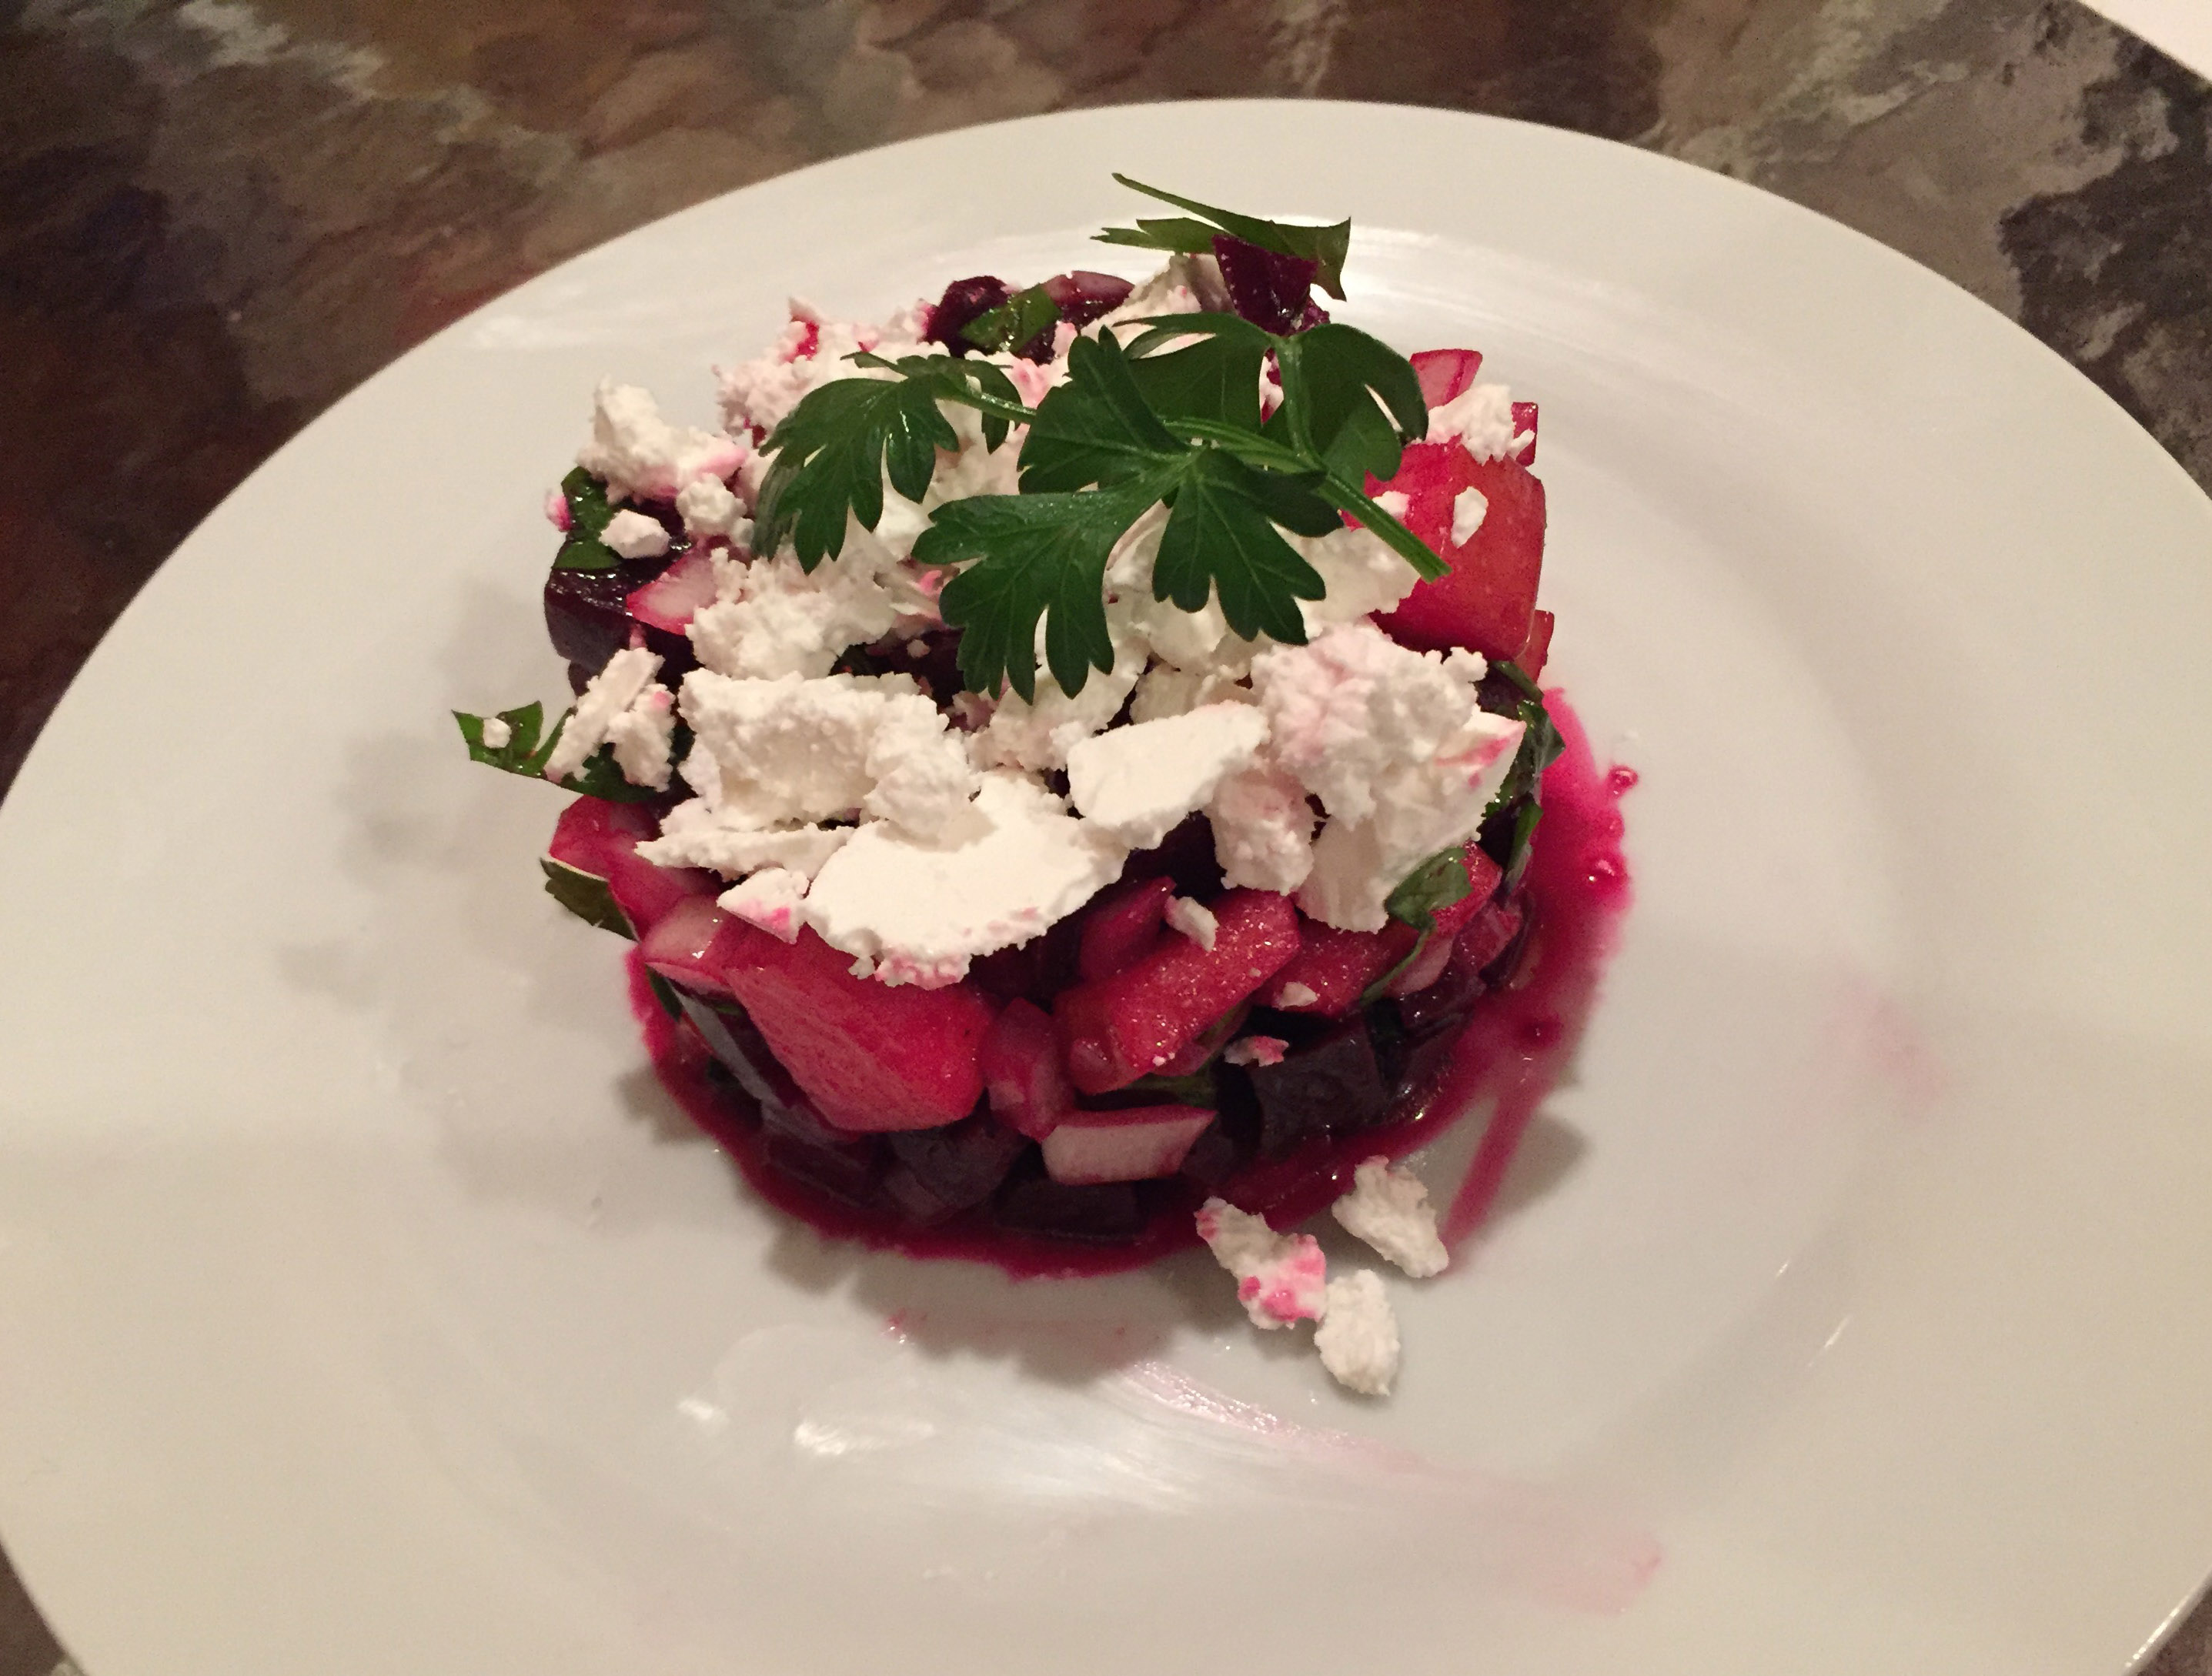 Timbale of Beet & Apple Salad with Feta